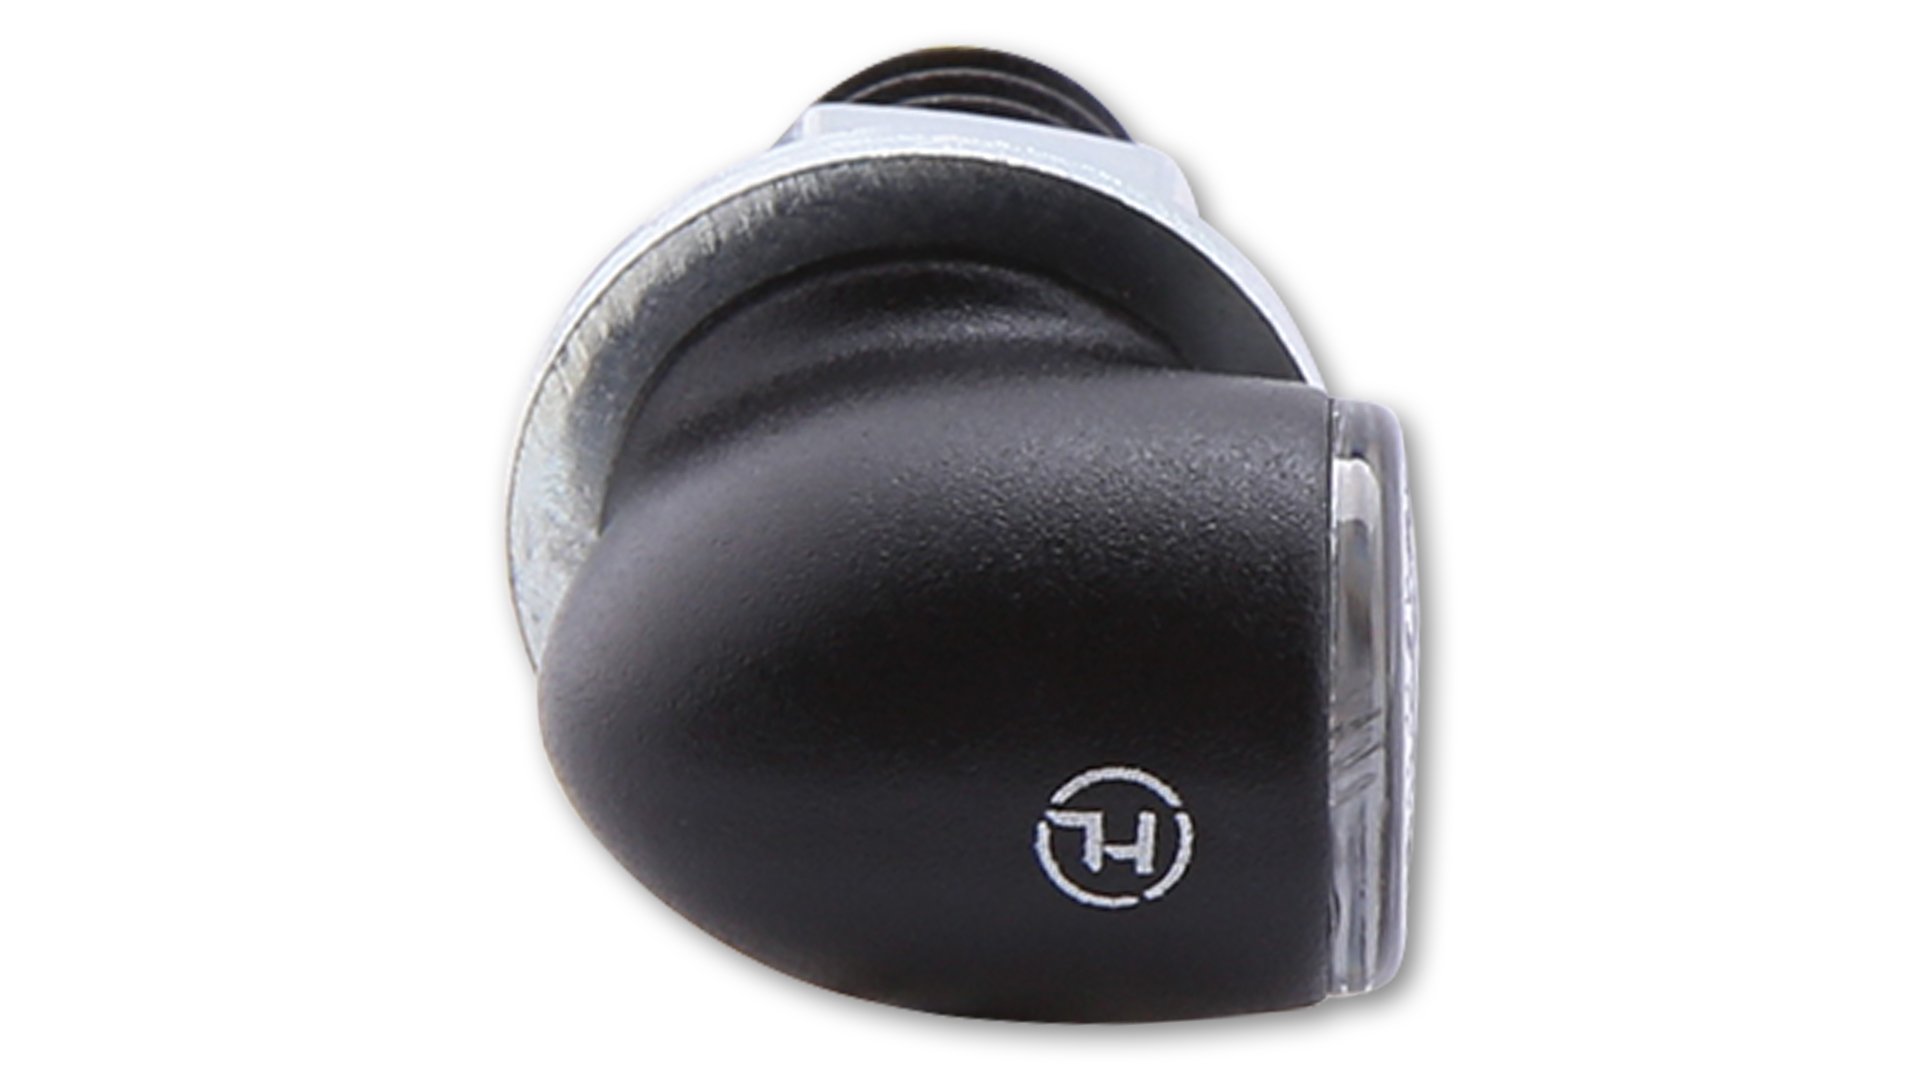 HIGHSIDER PROTON TWO LED turn signal/position light, tinted glass, E-tested, pair.